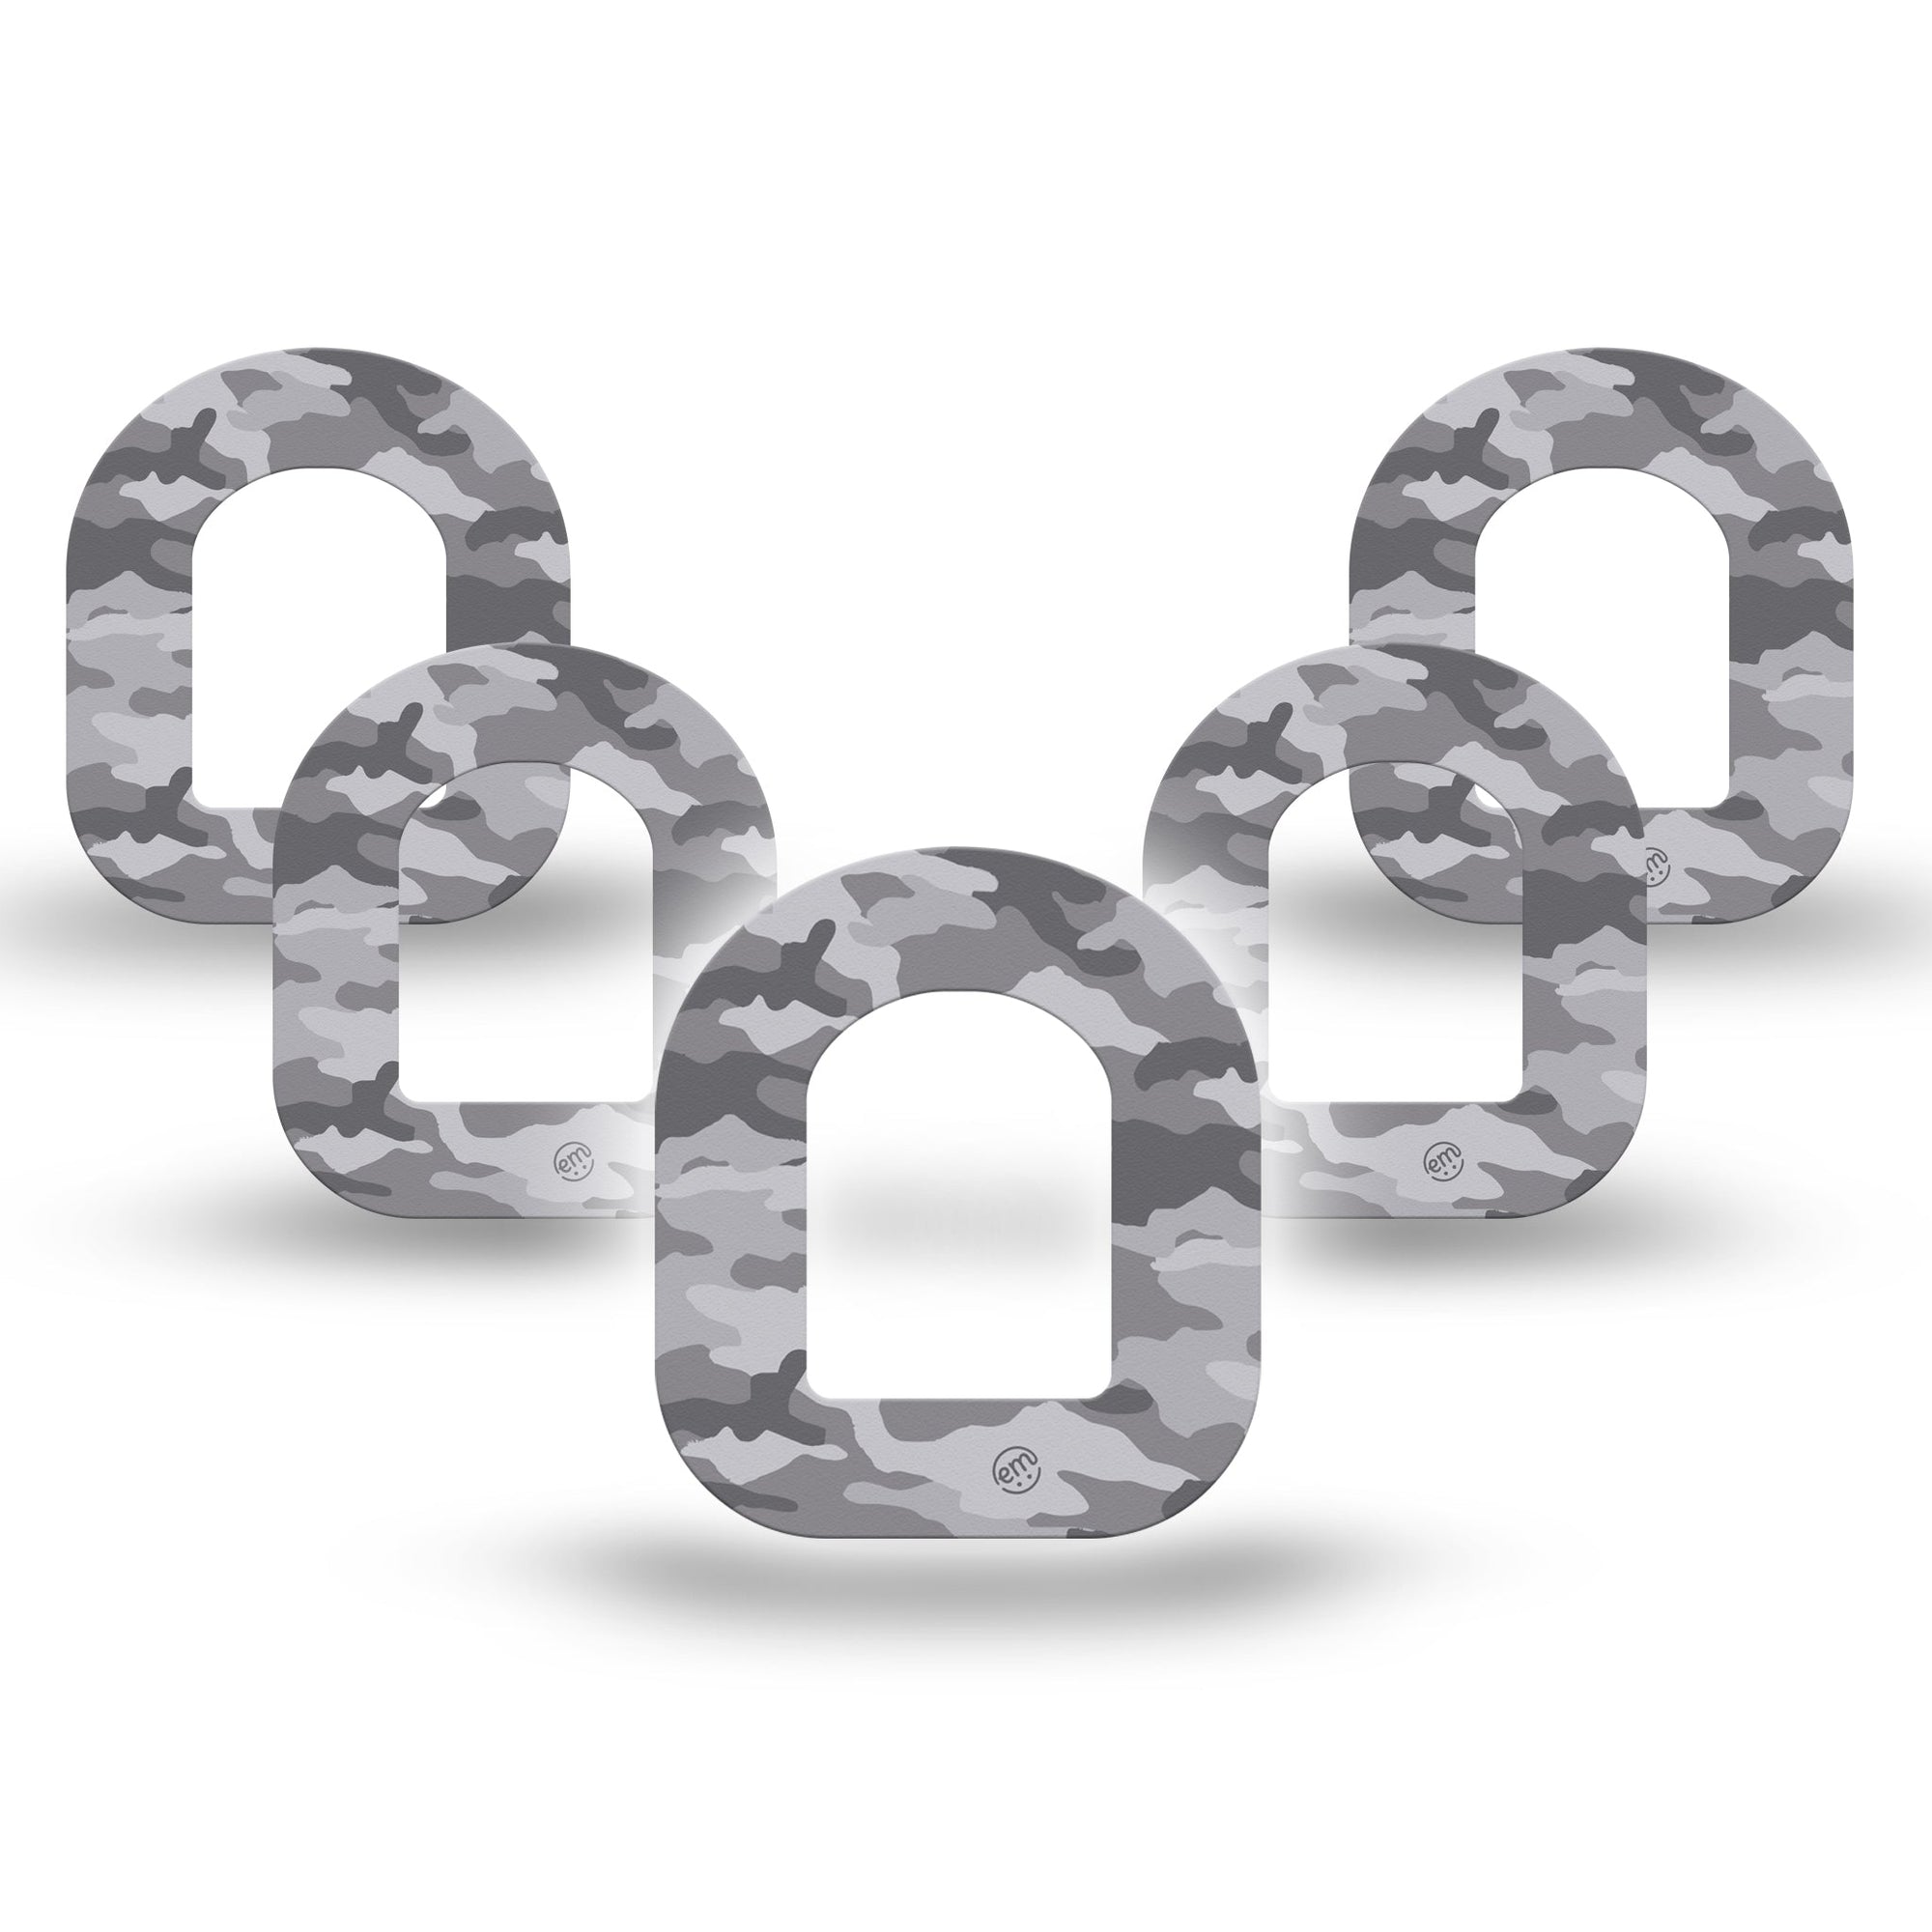 ExpressionMed Gray Camo Pod Mini Tape 5-Pack, City Camouflage Overlay Patch Pump Design